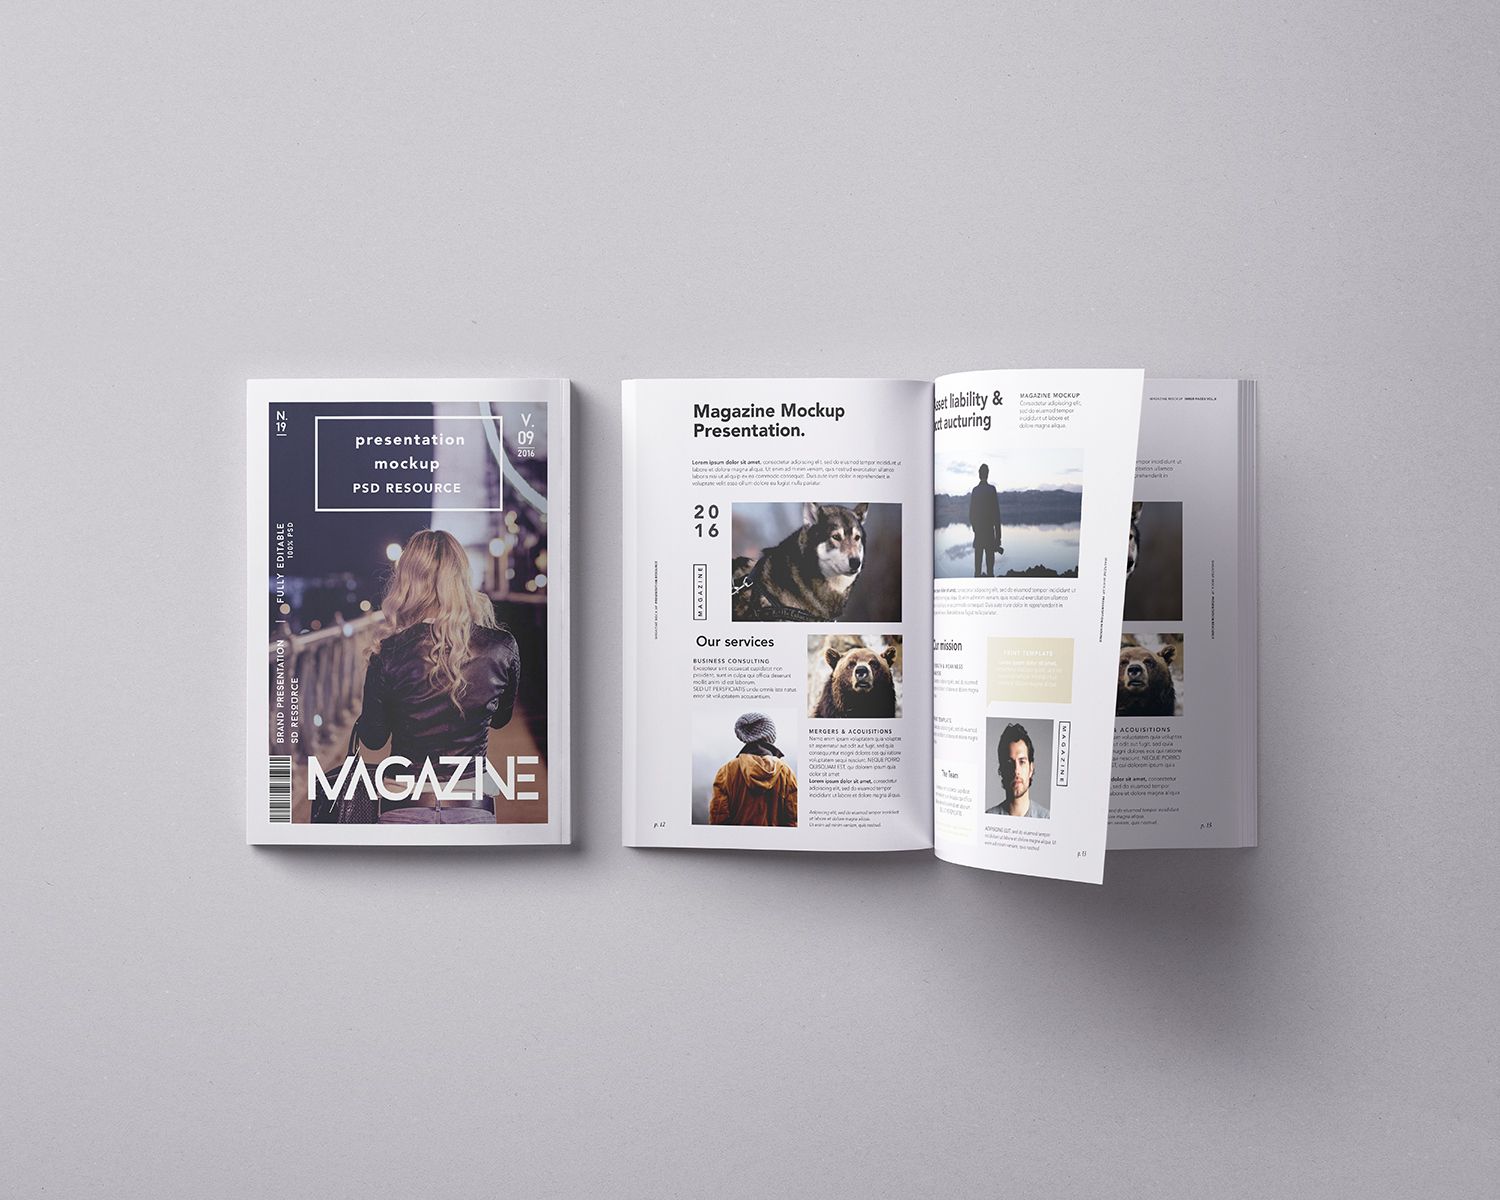 Free Magazine Psd Mockup To Showcase Your Next Project In A Photorealistic Look Psd File Consists Of Magazine Mockup Magazine Mockup Psd Magazine Mockup Free